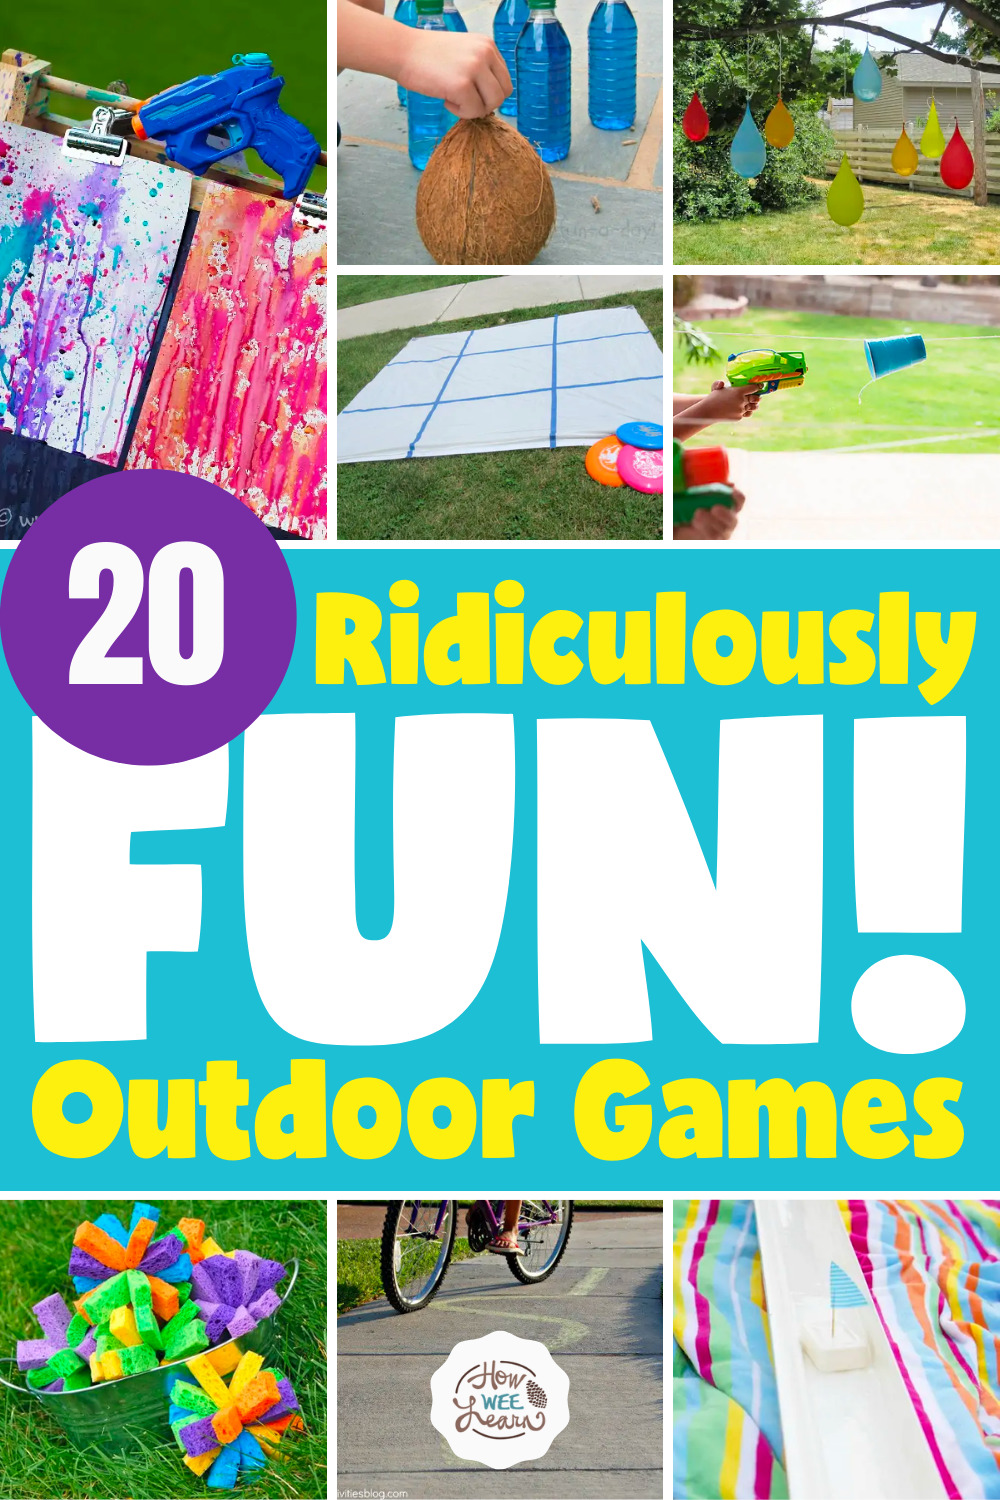 20 Ridiculously FUN! Outdoor Games for Kids